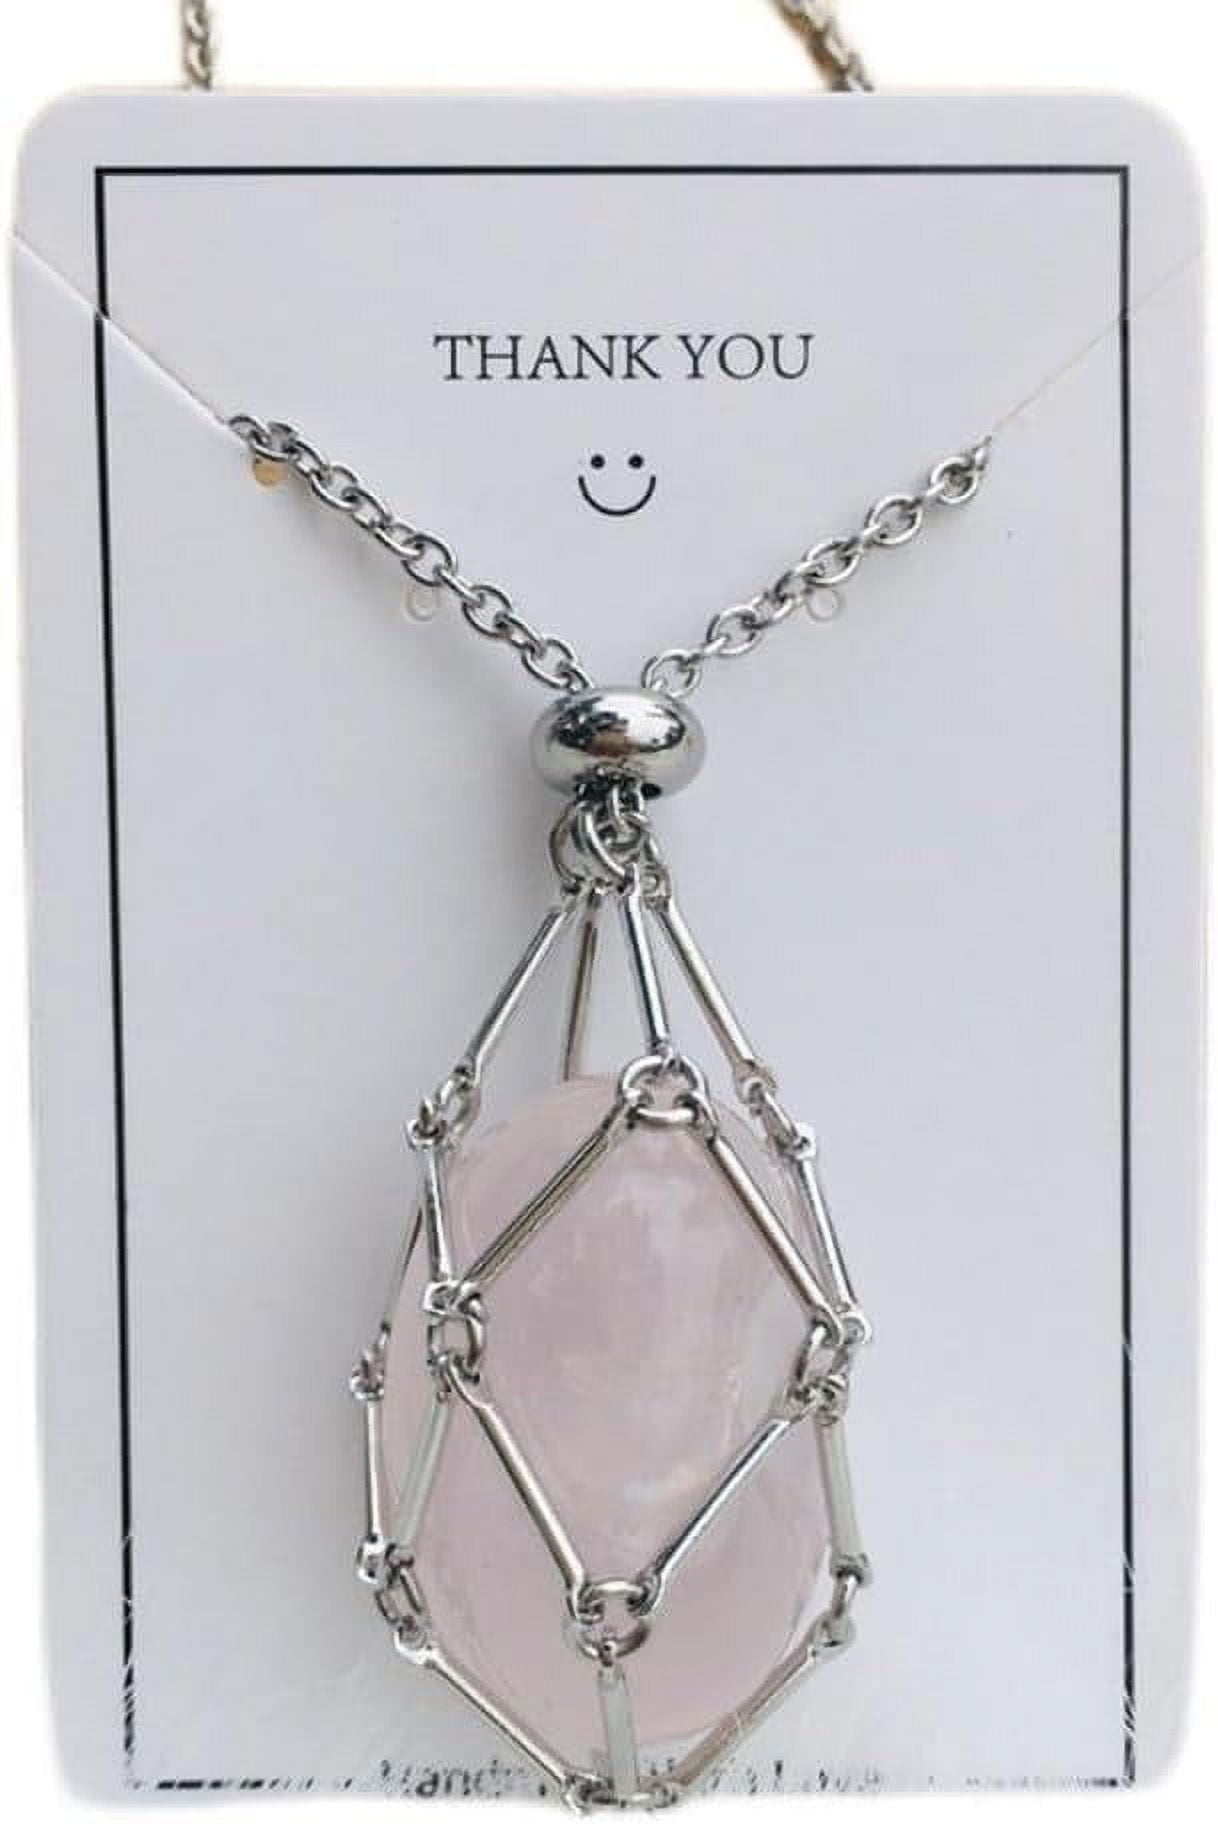 Interchangeable Crystal Holder Cage Necklace Silver Color Stone